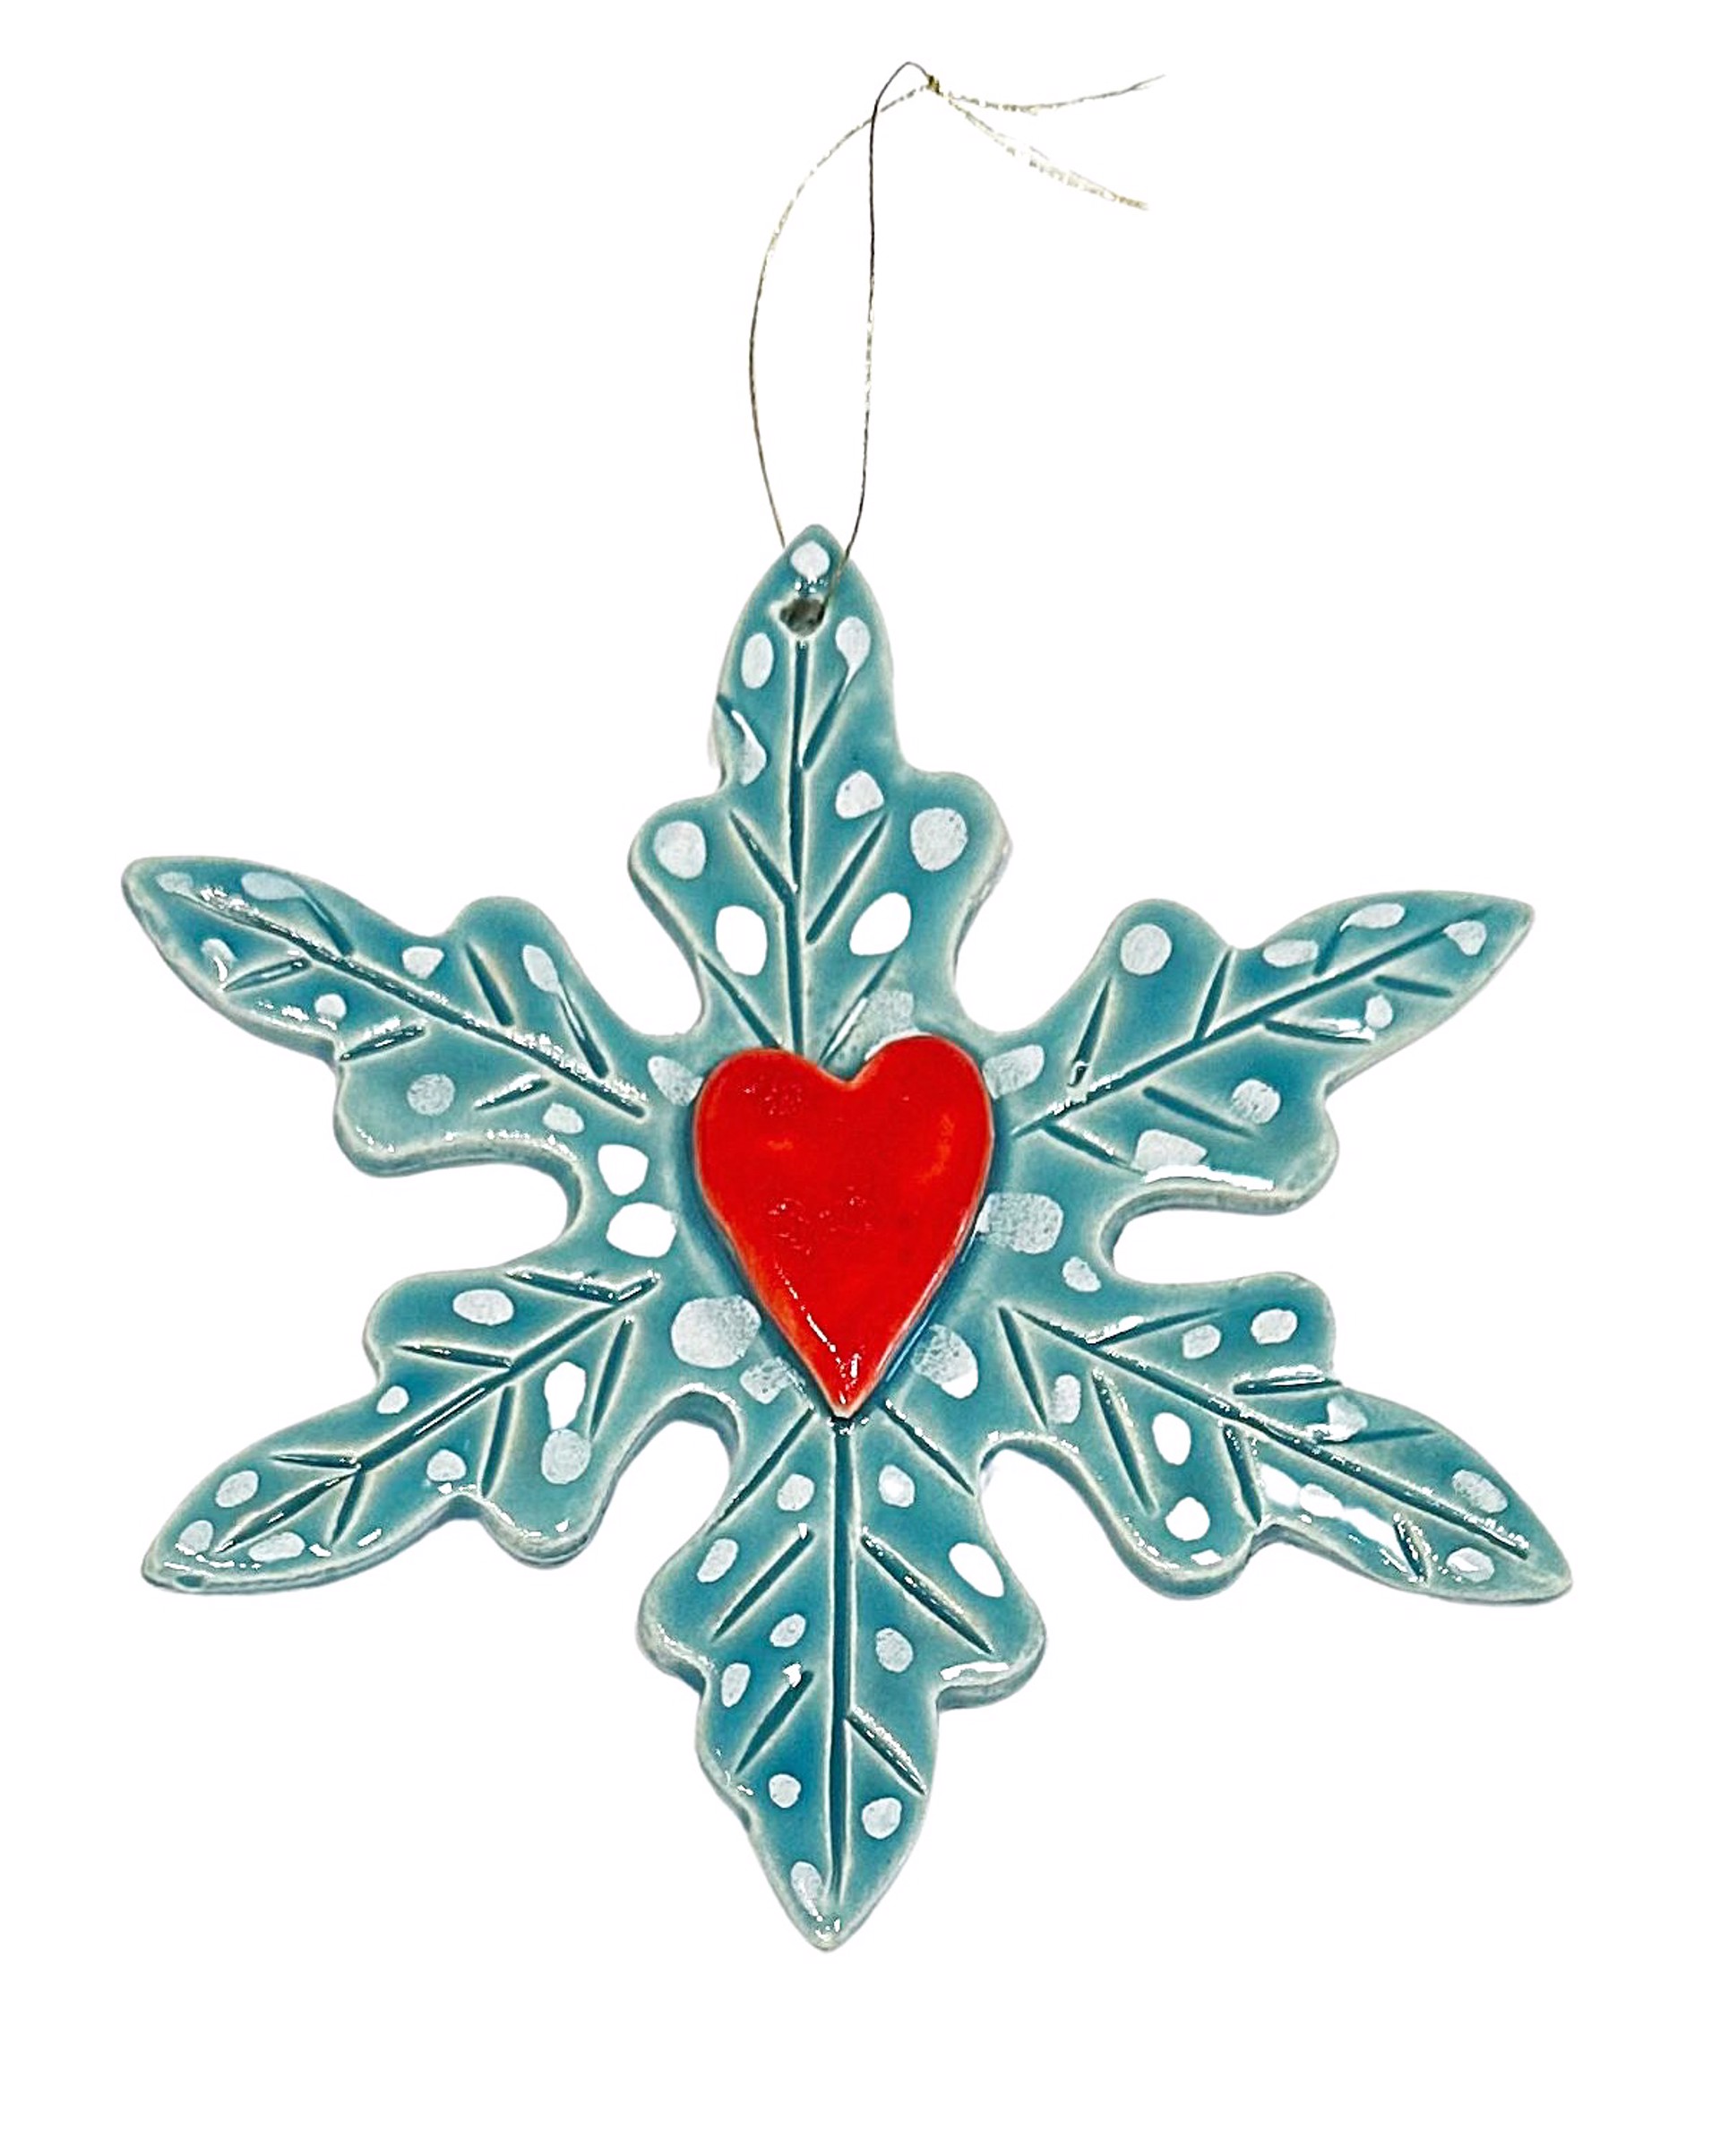 Ornament - Snowflake with Heart by Robin Chlad